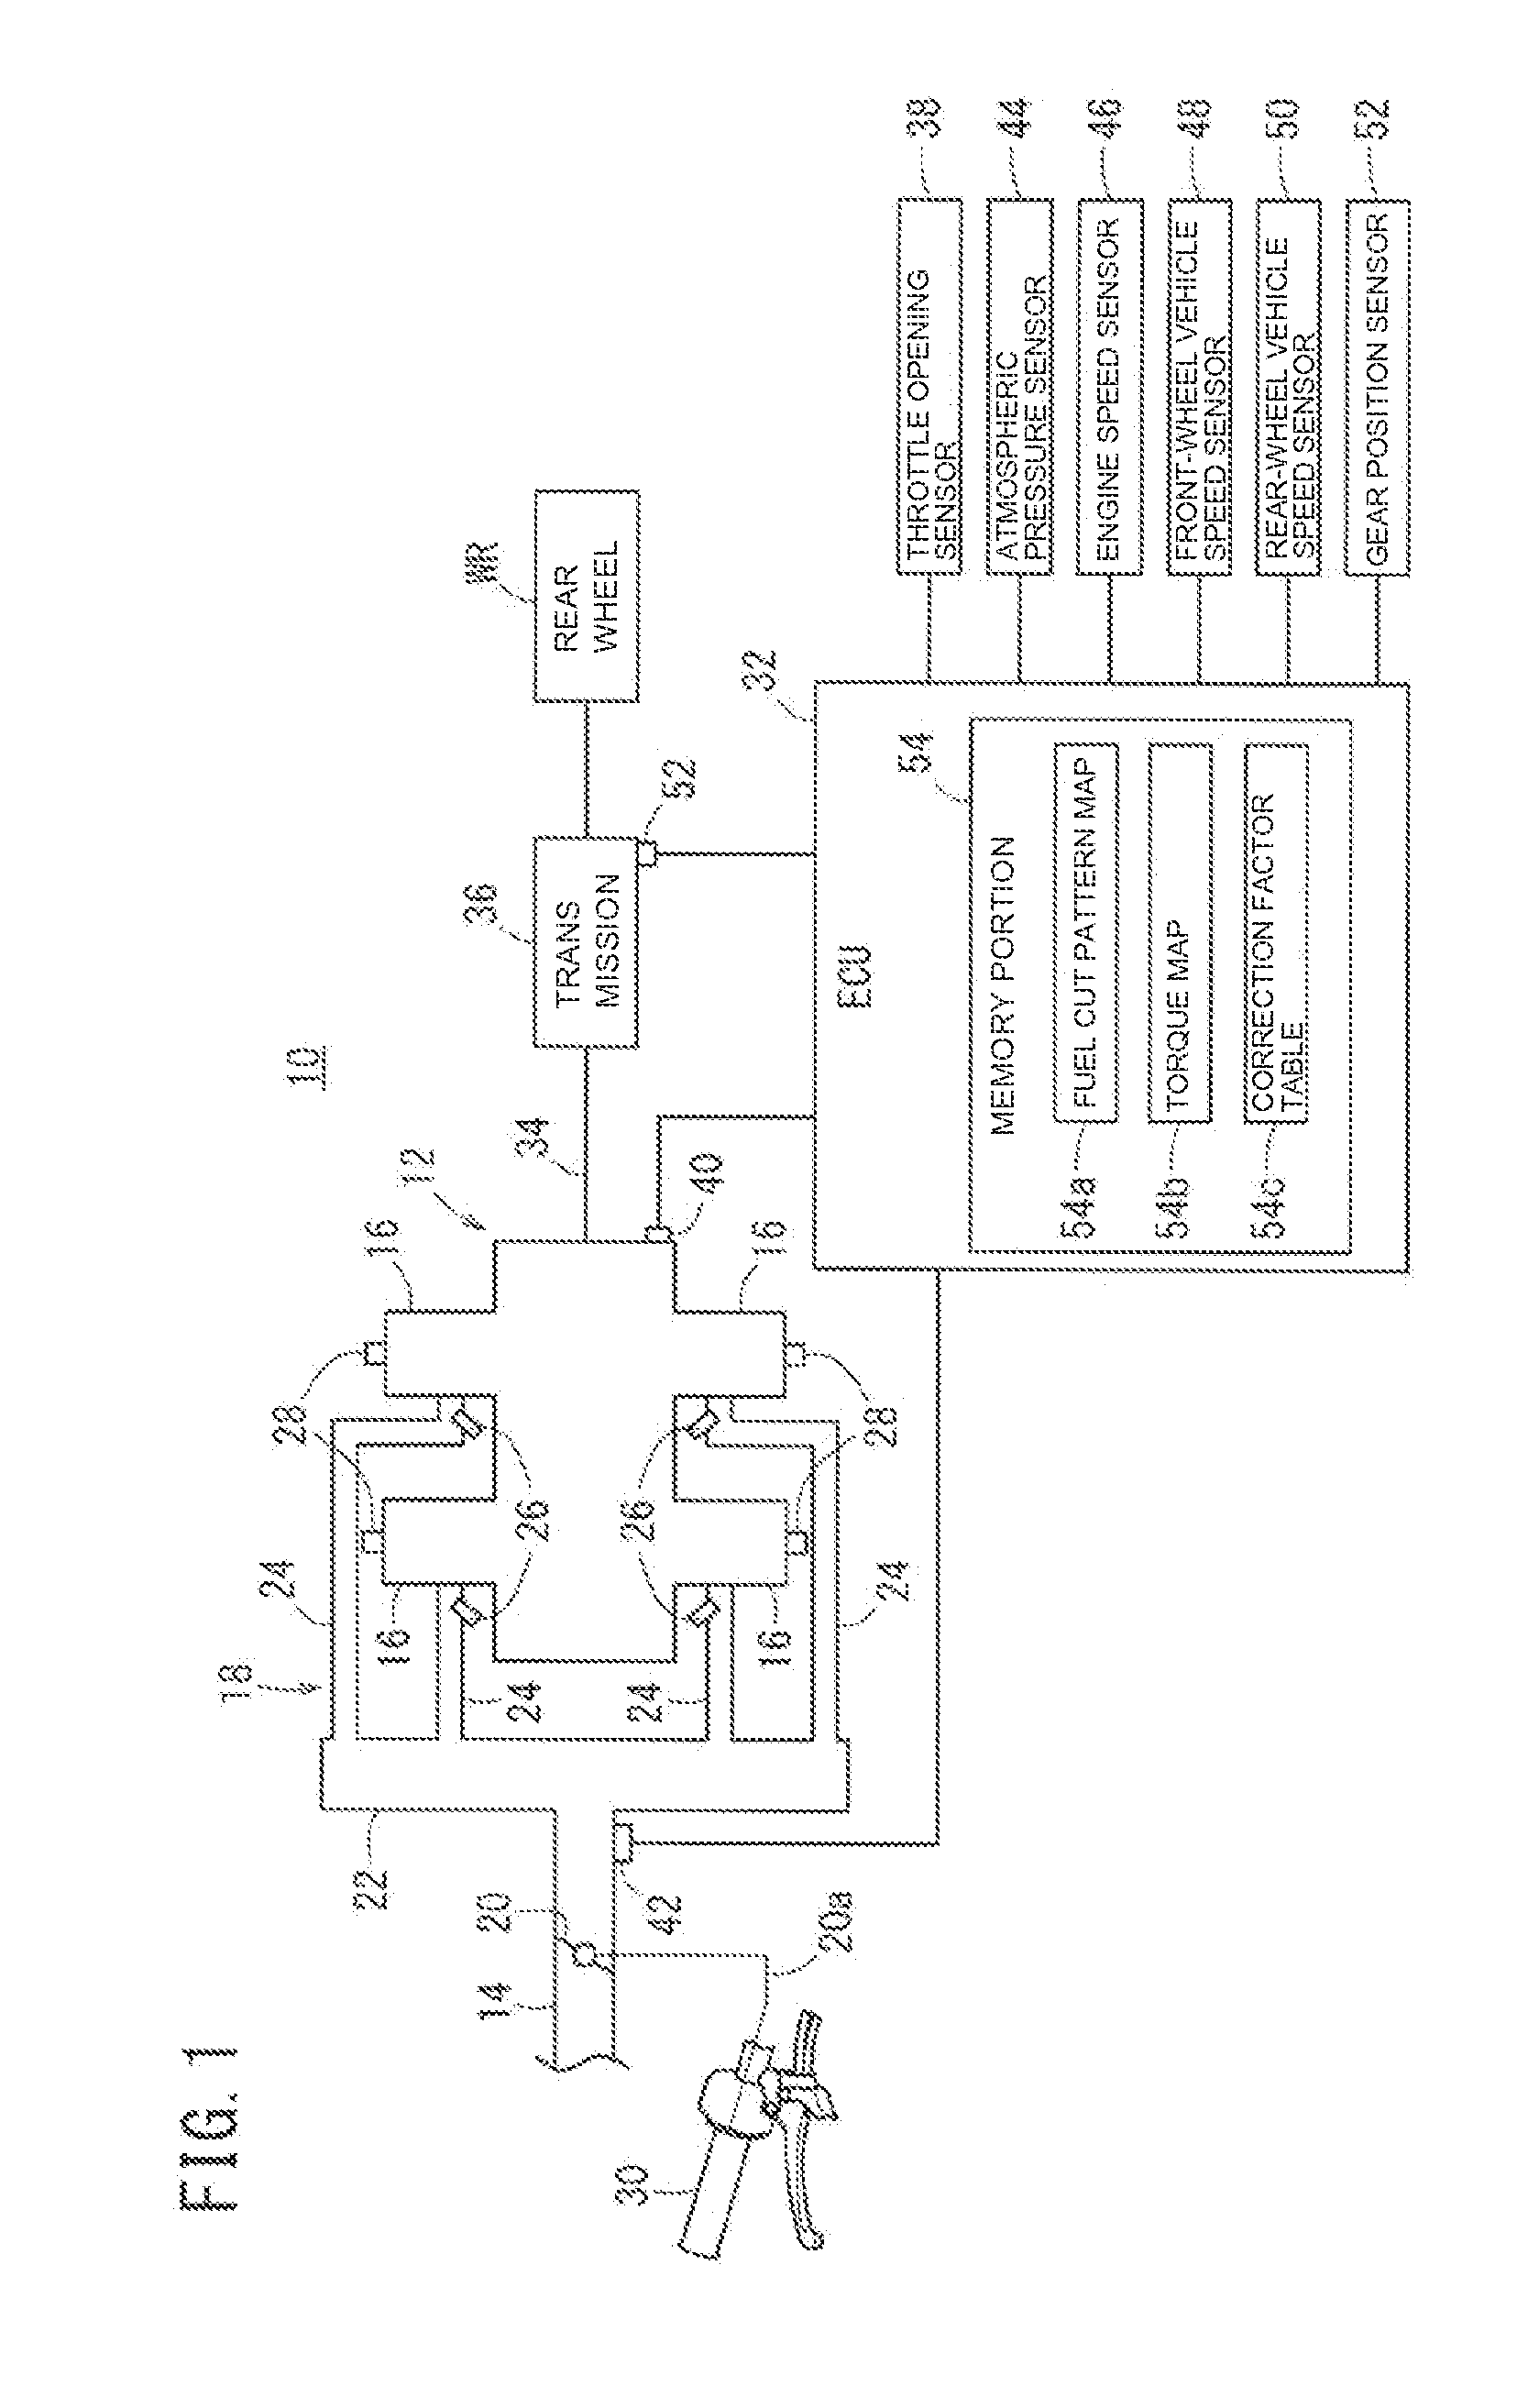 Traction control system for vehicle